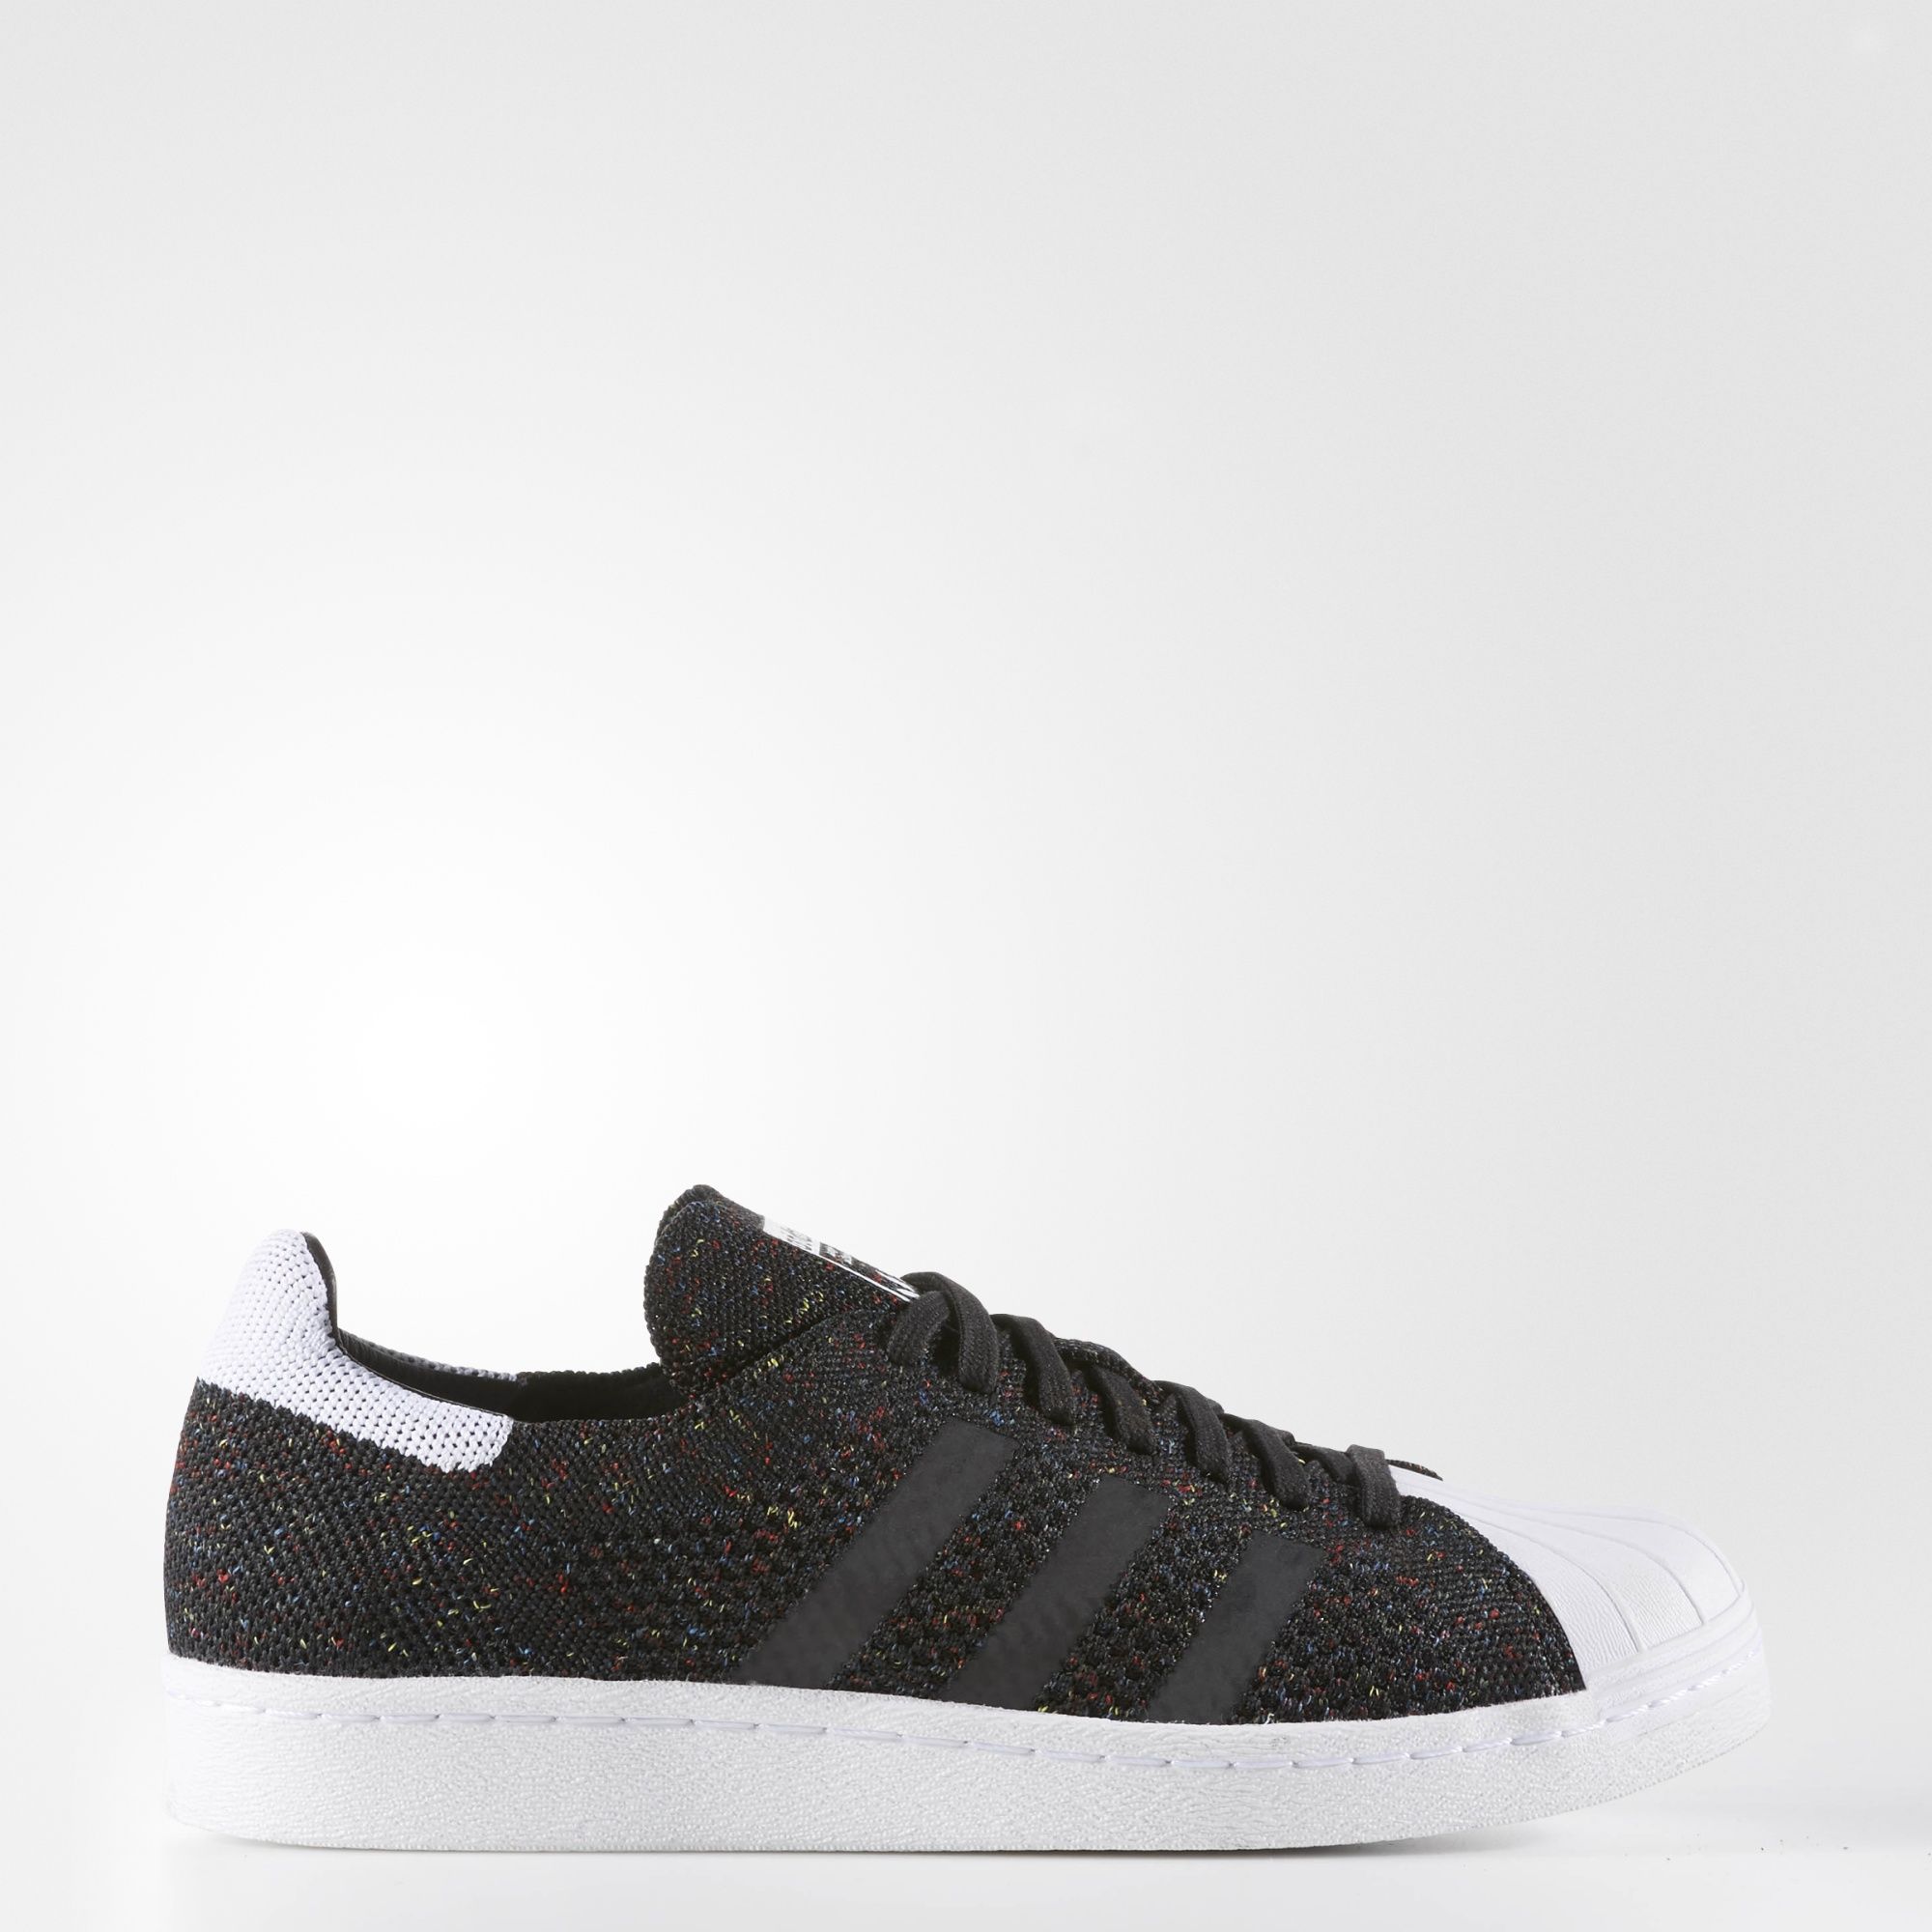 The Superstar 80s is Now Available in Primeknit-8